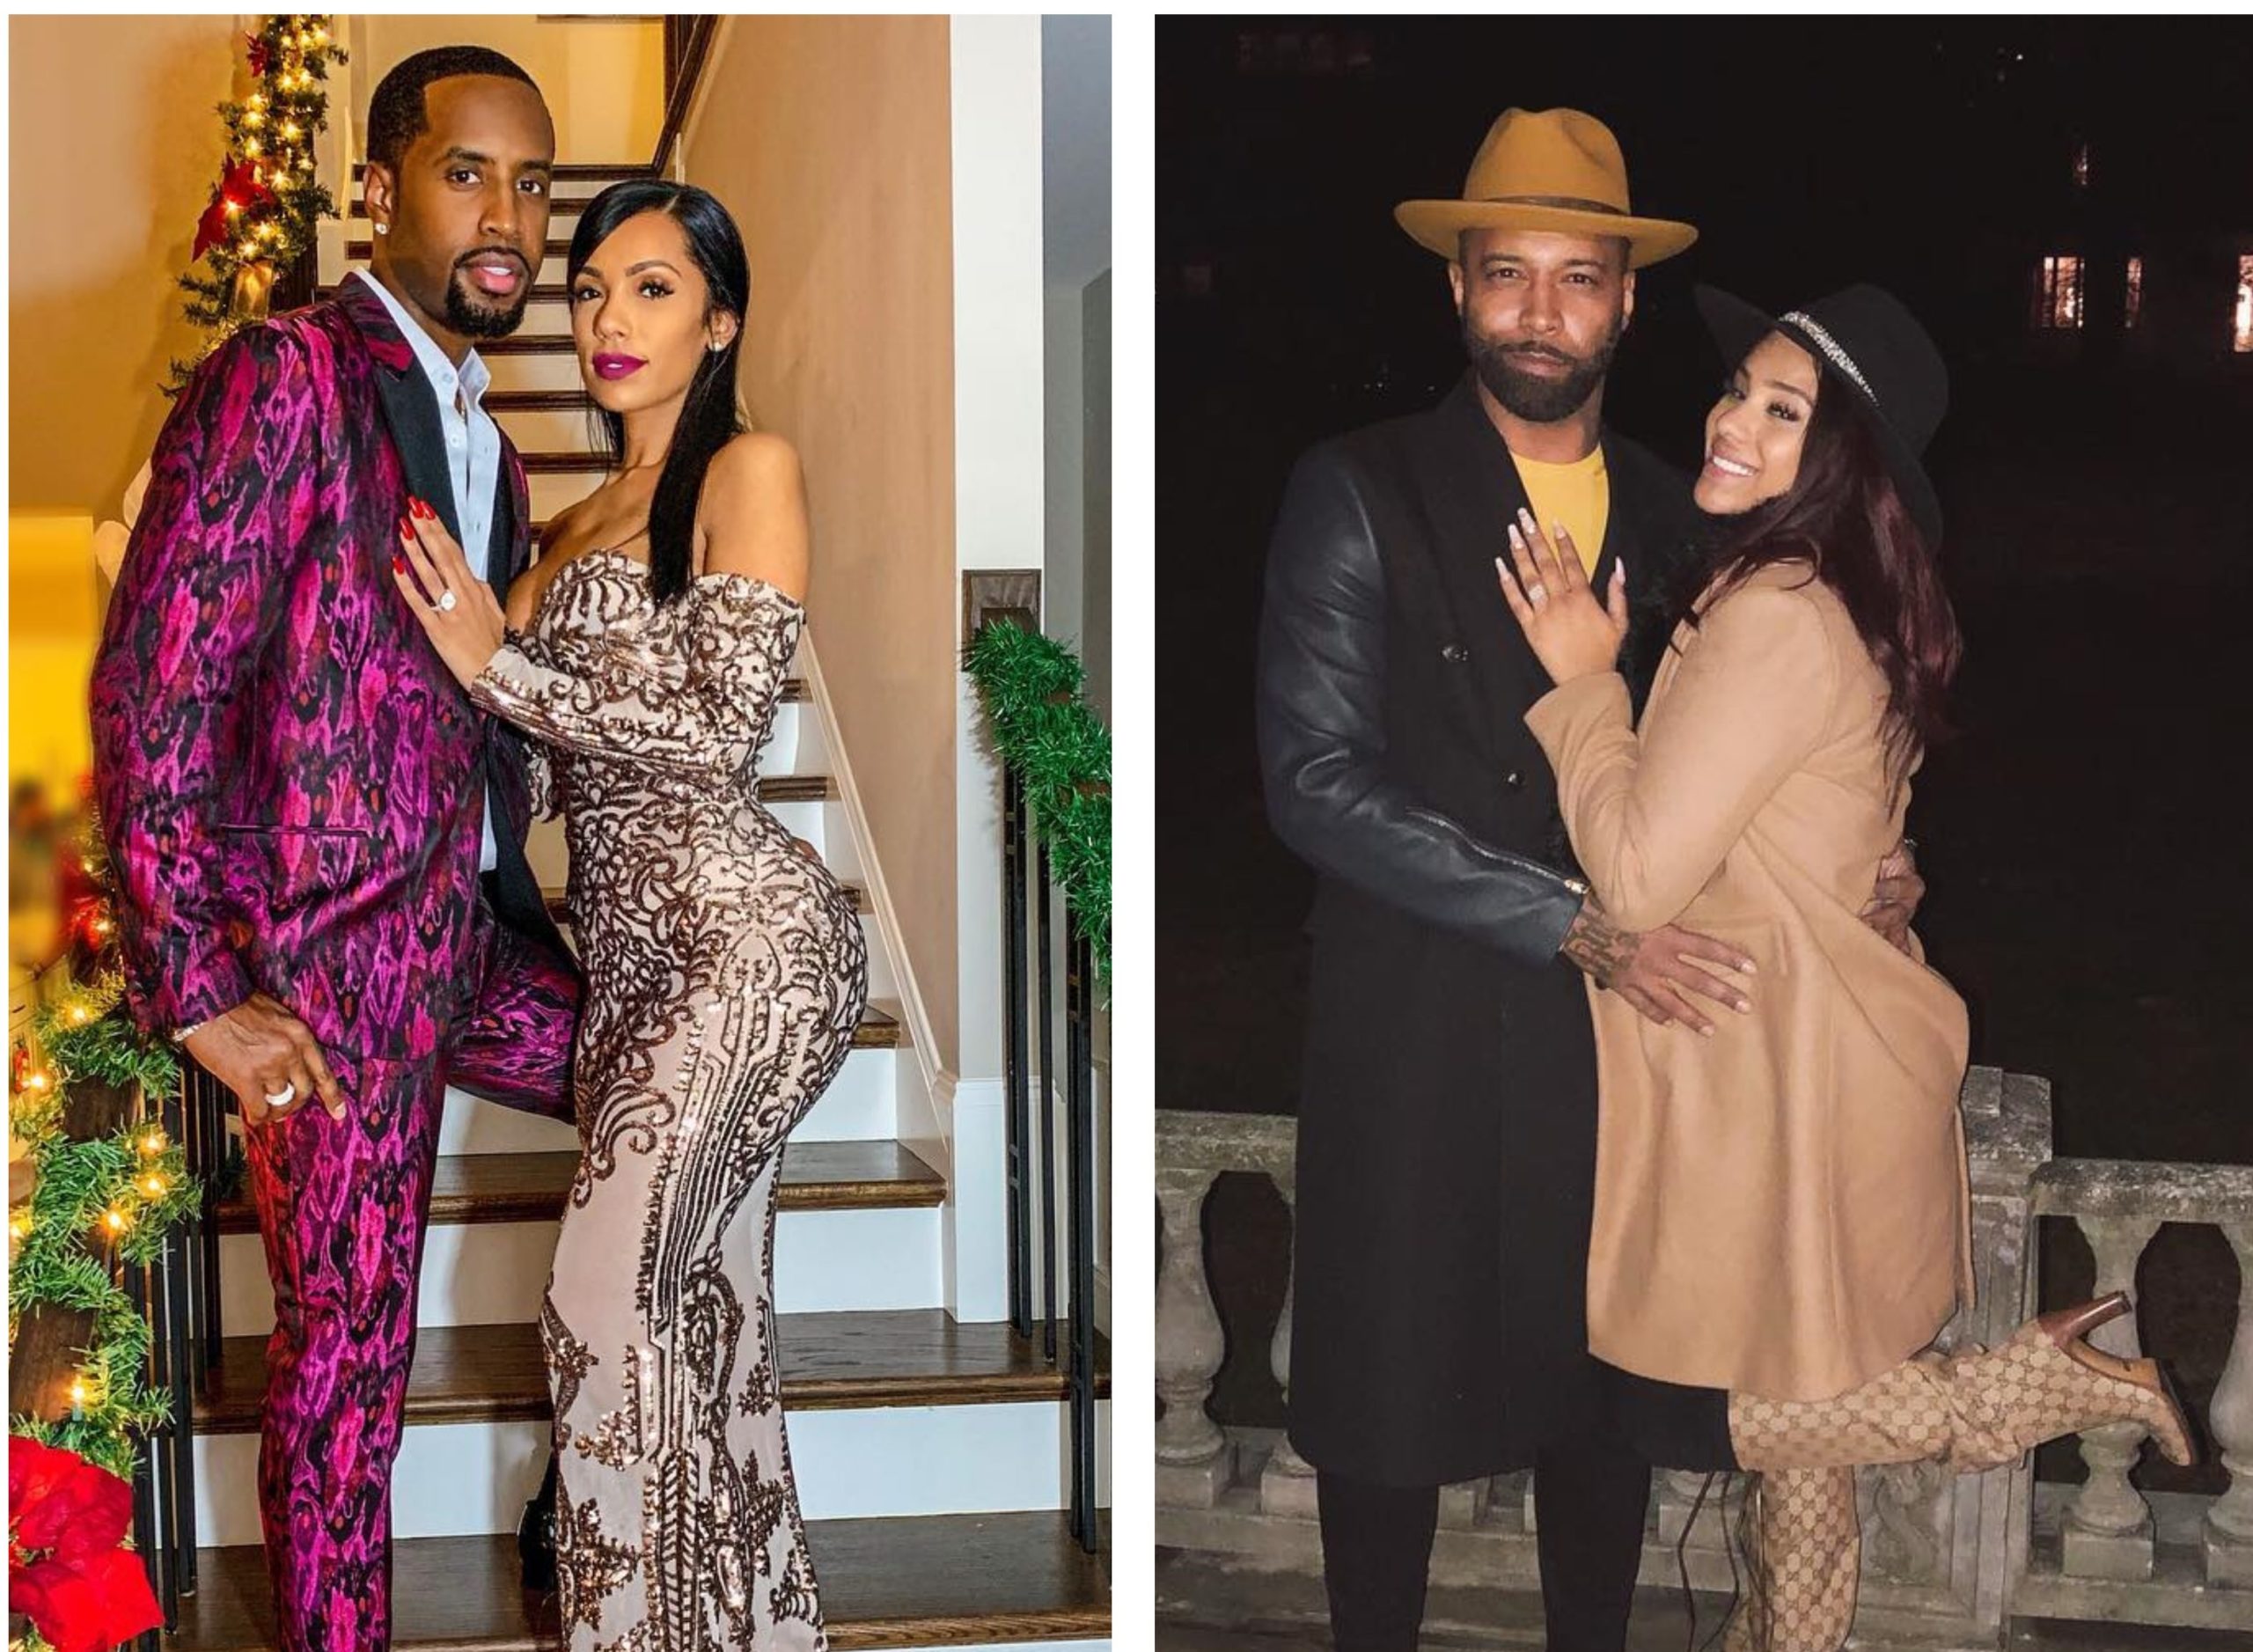 Erica Mena seemingly wants all the smoke with Joe Budden and his lass Cyn S...